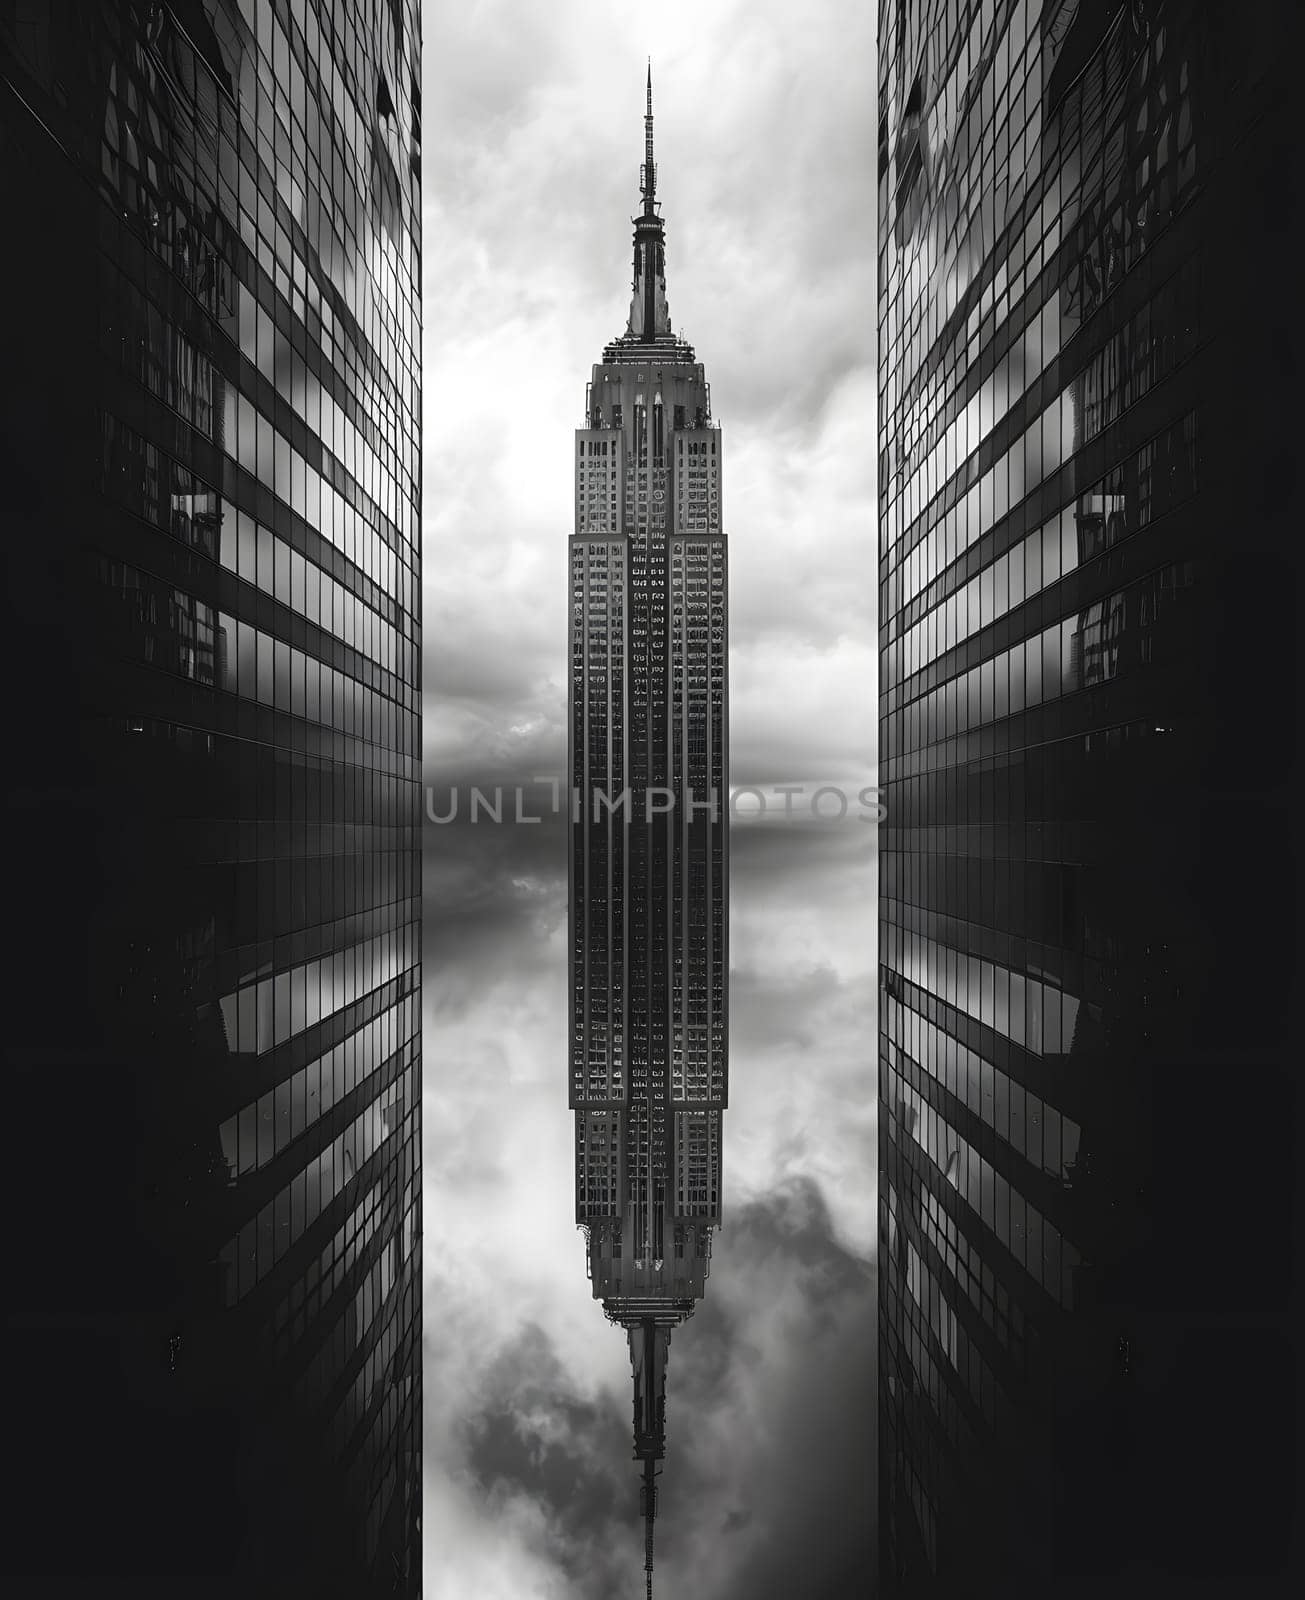 a black and white photo of the empire state building between two tall buildings by Nadtochiy